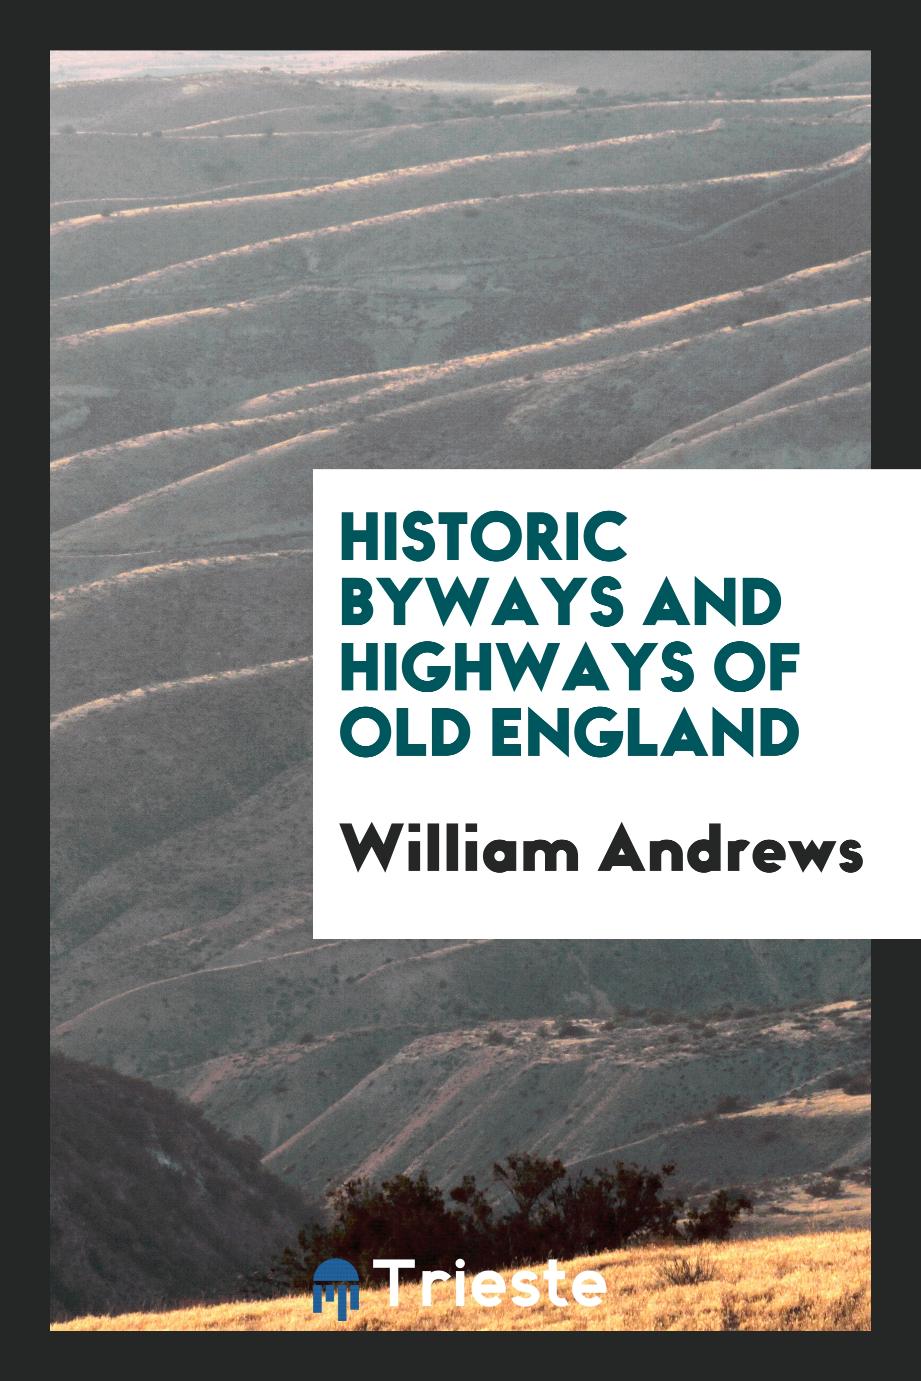 Historic byways and highways of Old England